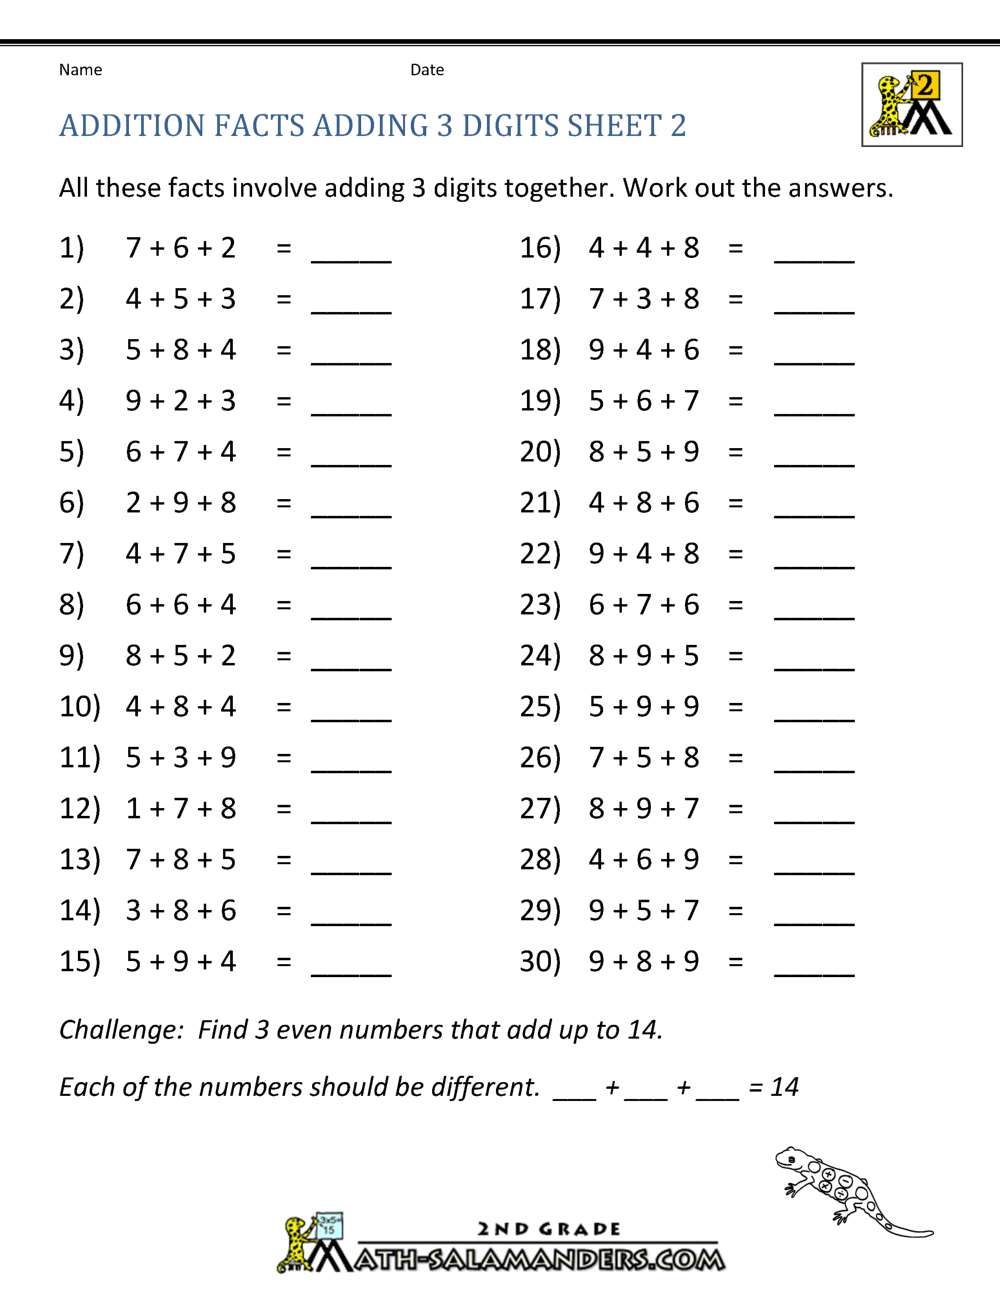 addition-plus-one-worksheets